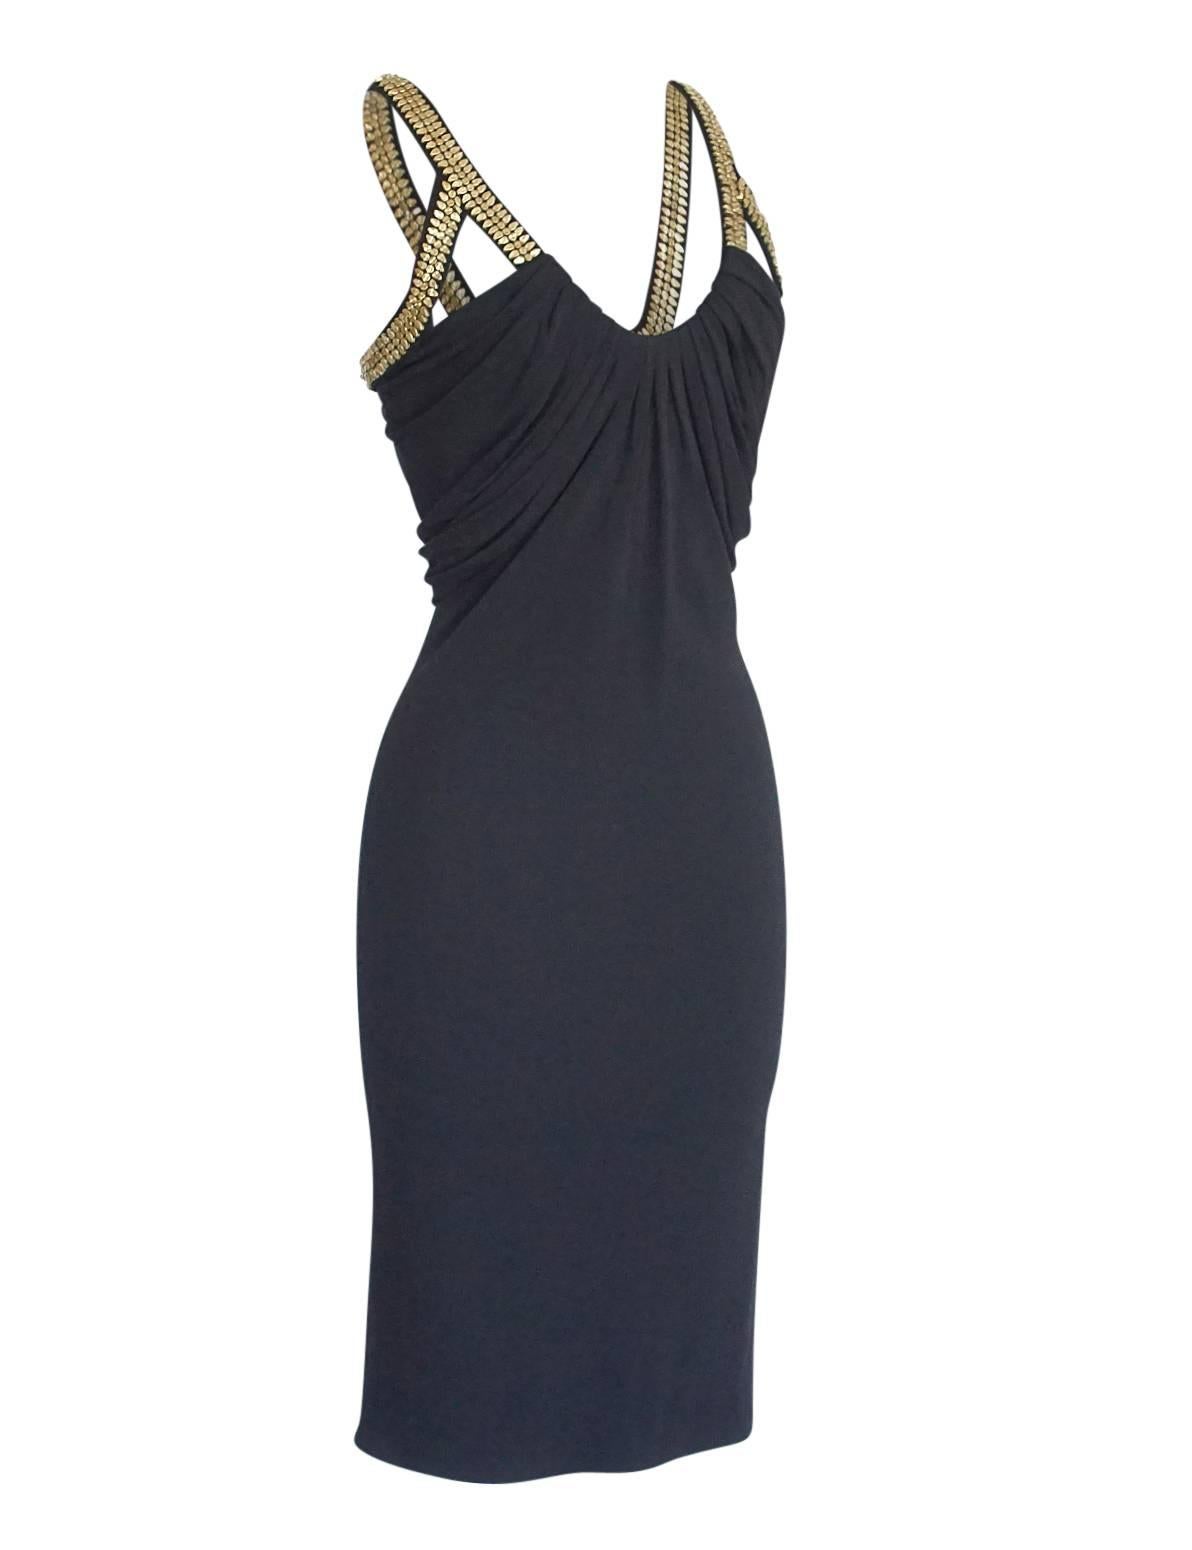 Guaranteed authentic Versace dress with unique engraved gold metal around arm and on straps.
Jet black jersey scoop neck with gorgeous draping around the top. 
Soft shaping, very feminine and figure flattering. 
Fabric is silk and rayon and has